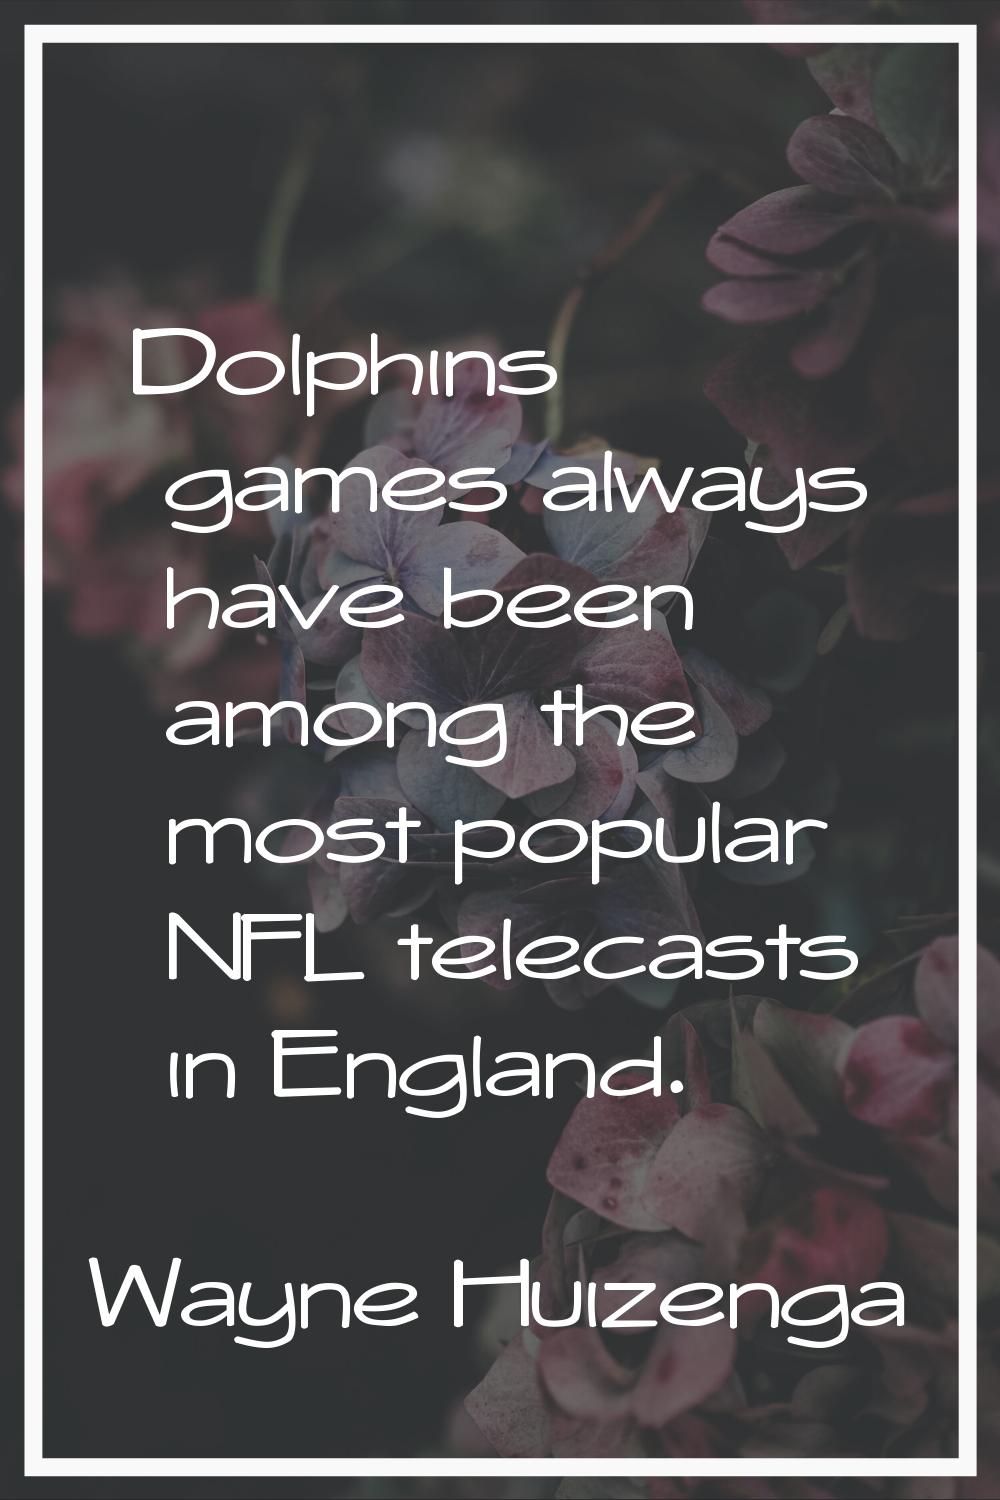 Dolphins games always have been among the most popular NFL telecasts in England.